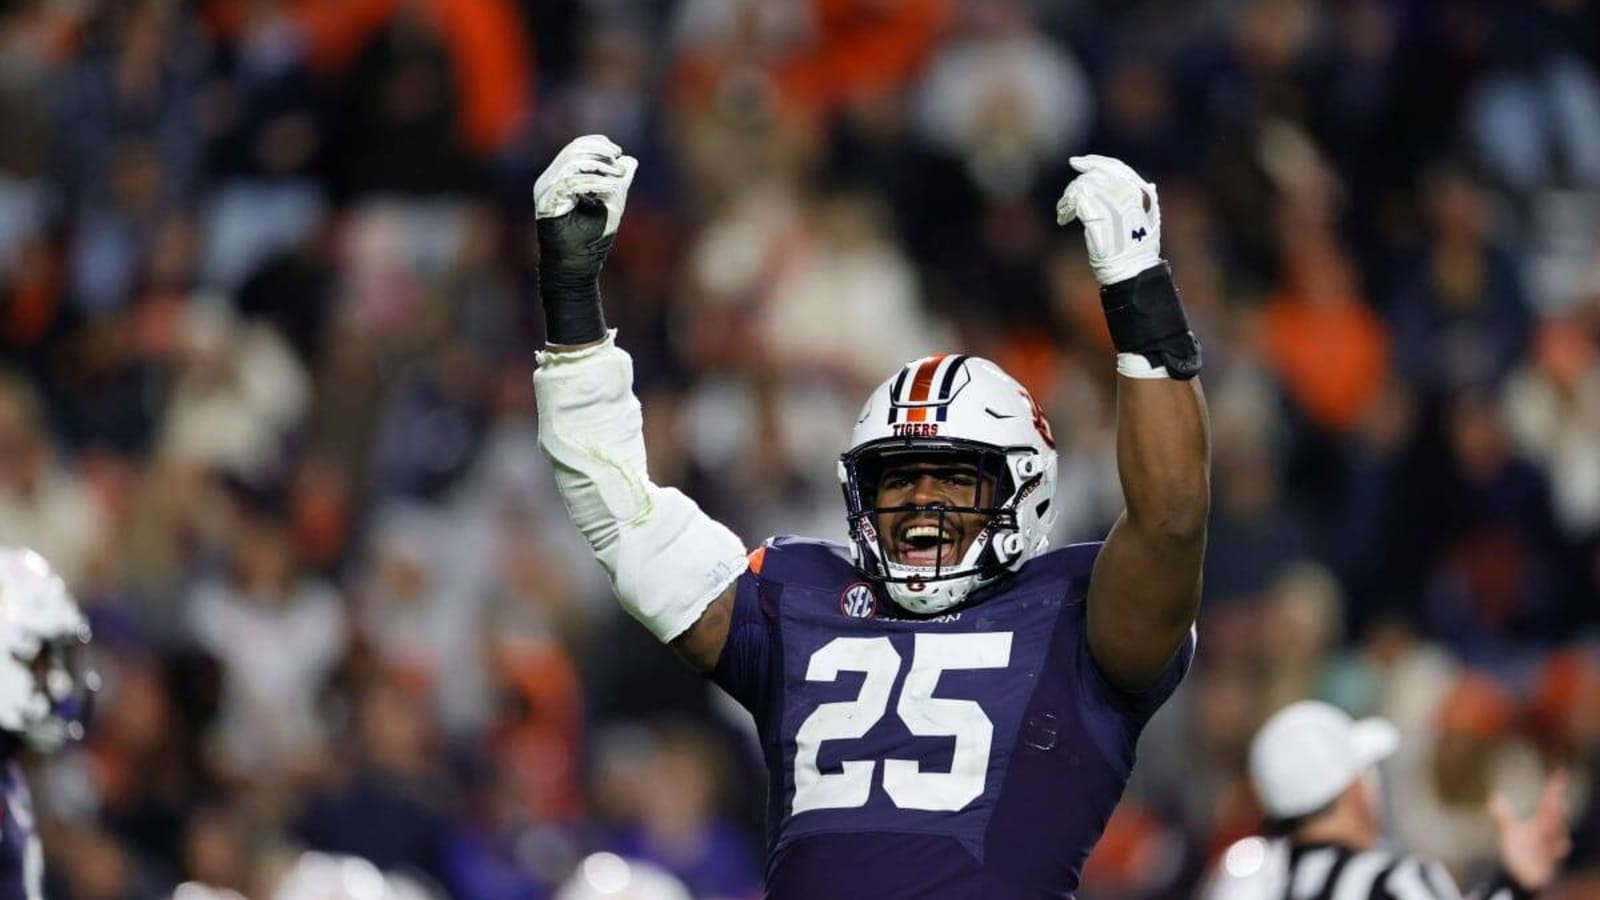 Auburn DL Colby Wooden selected by Green Bay Packers in NFL Draft